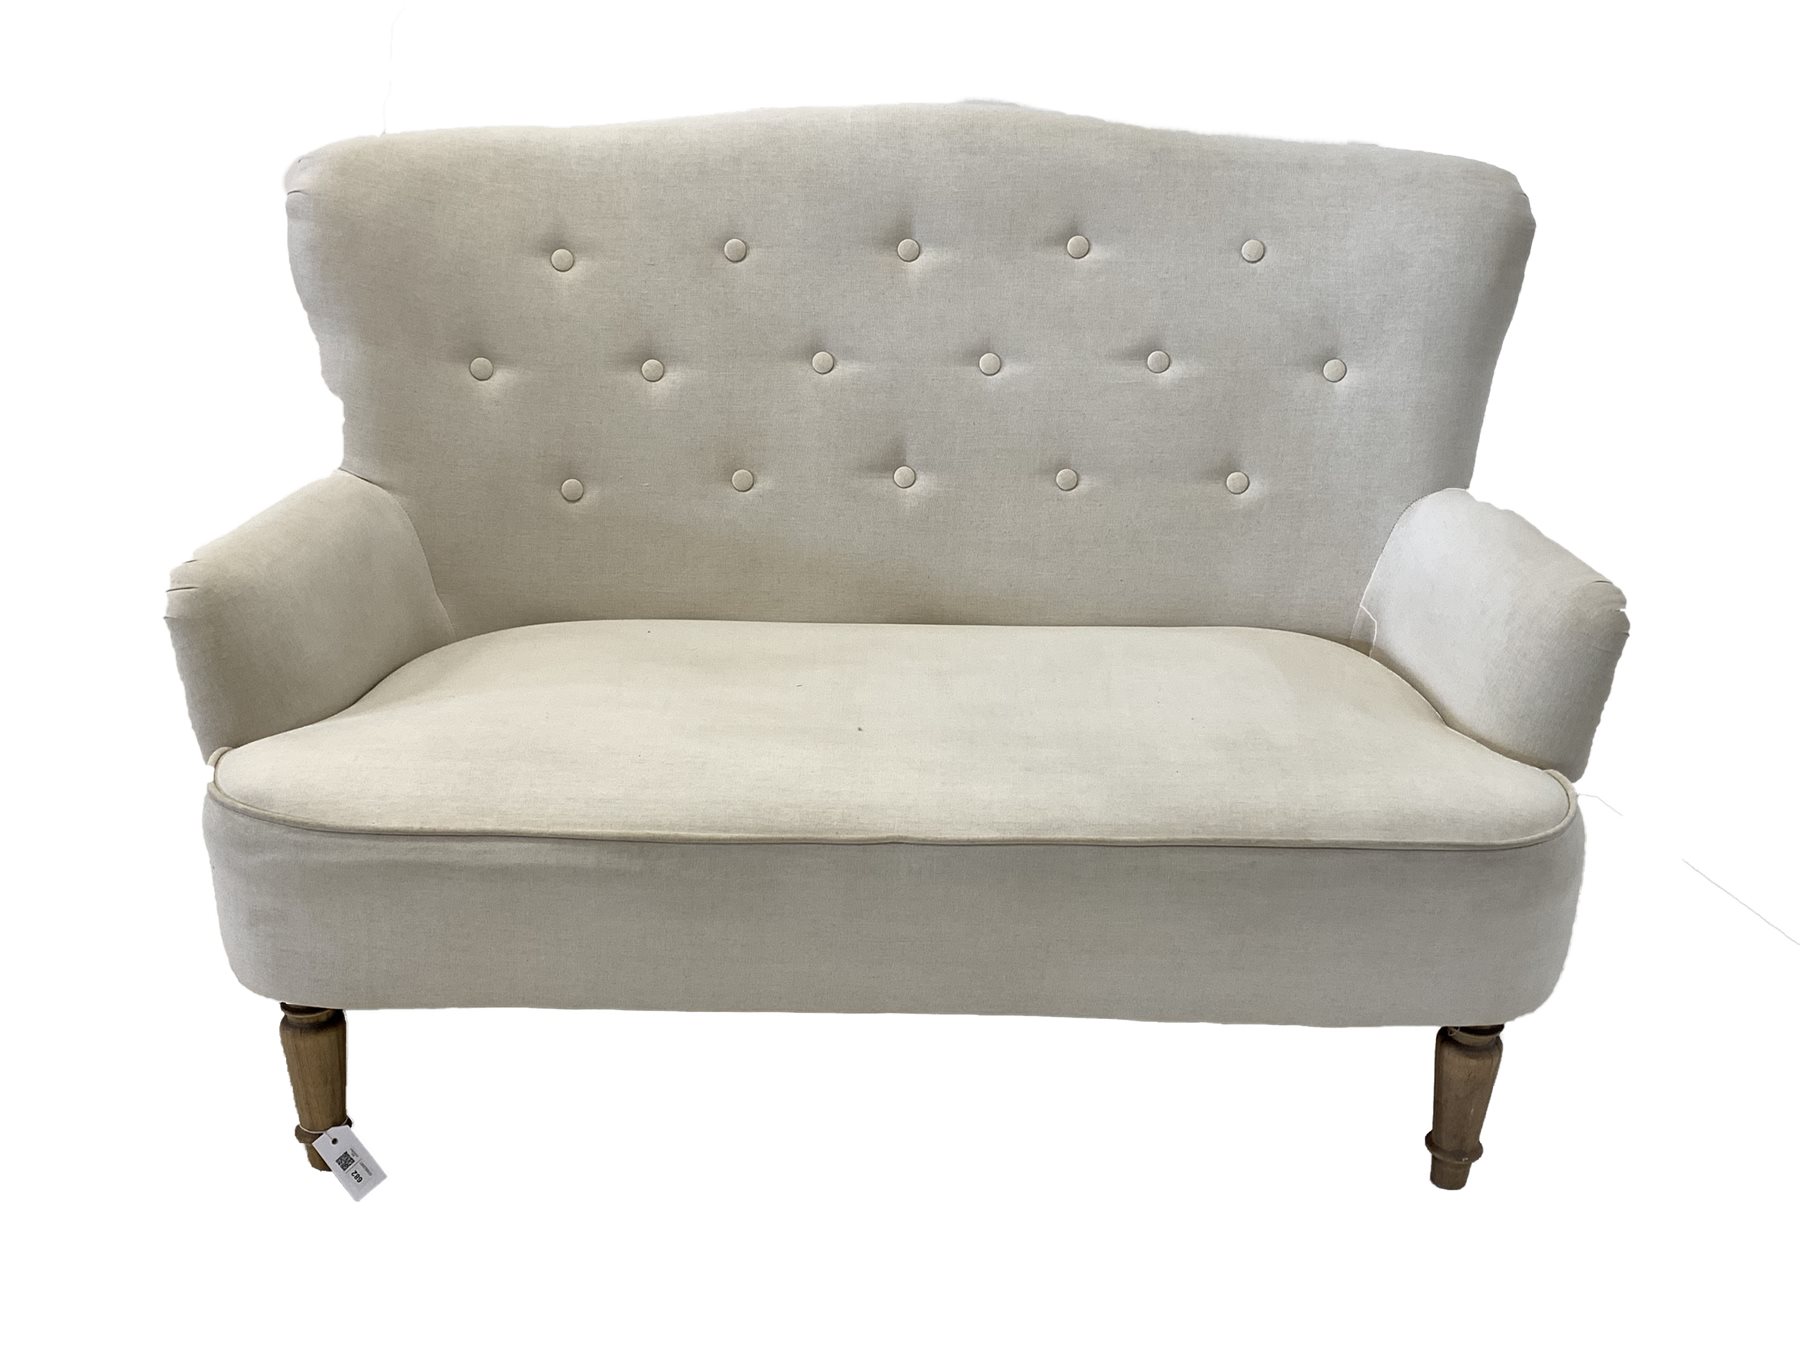 Traditional 'Loveseat' two seat sofa, upholstered in oatmeal buttoned linen, with feature toile fabr